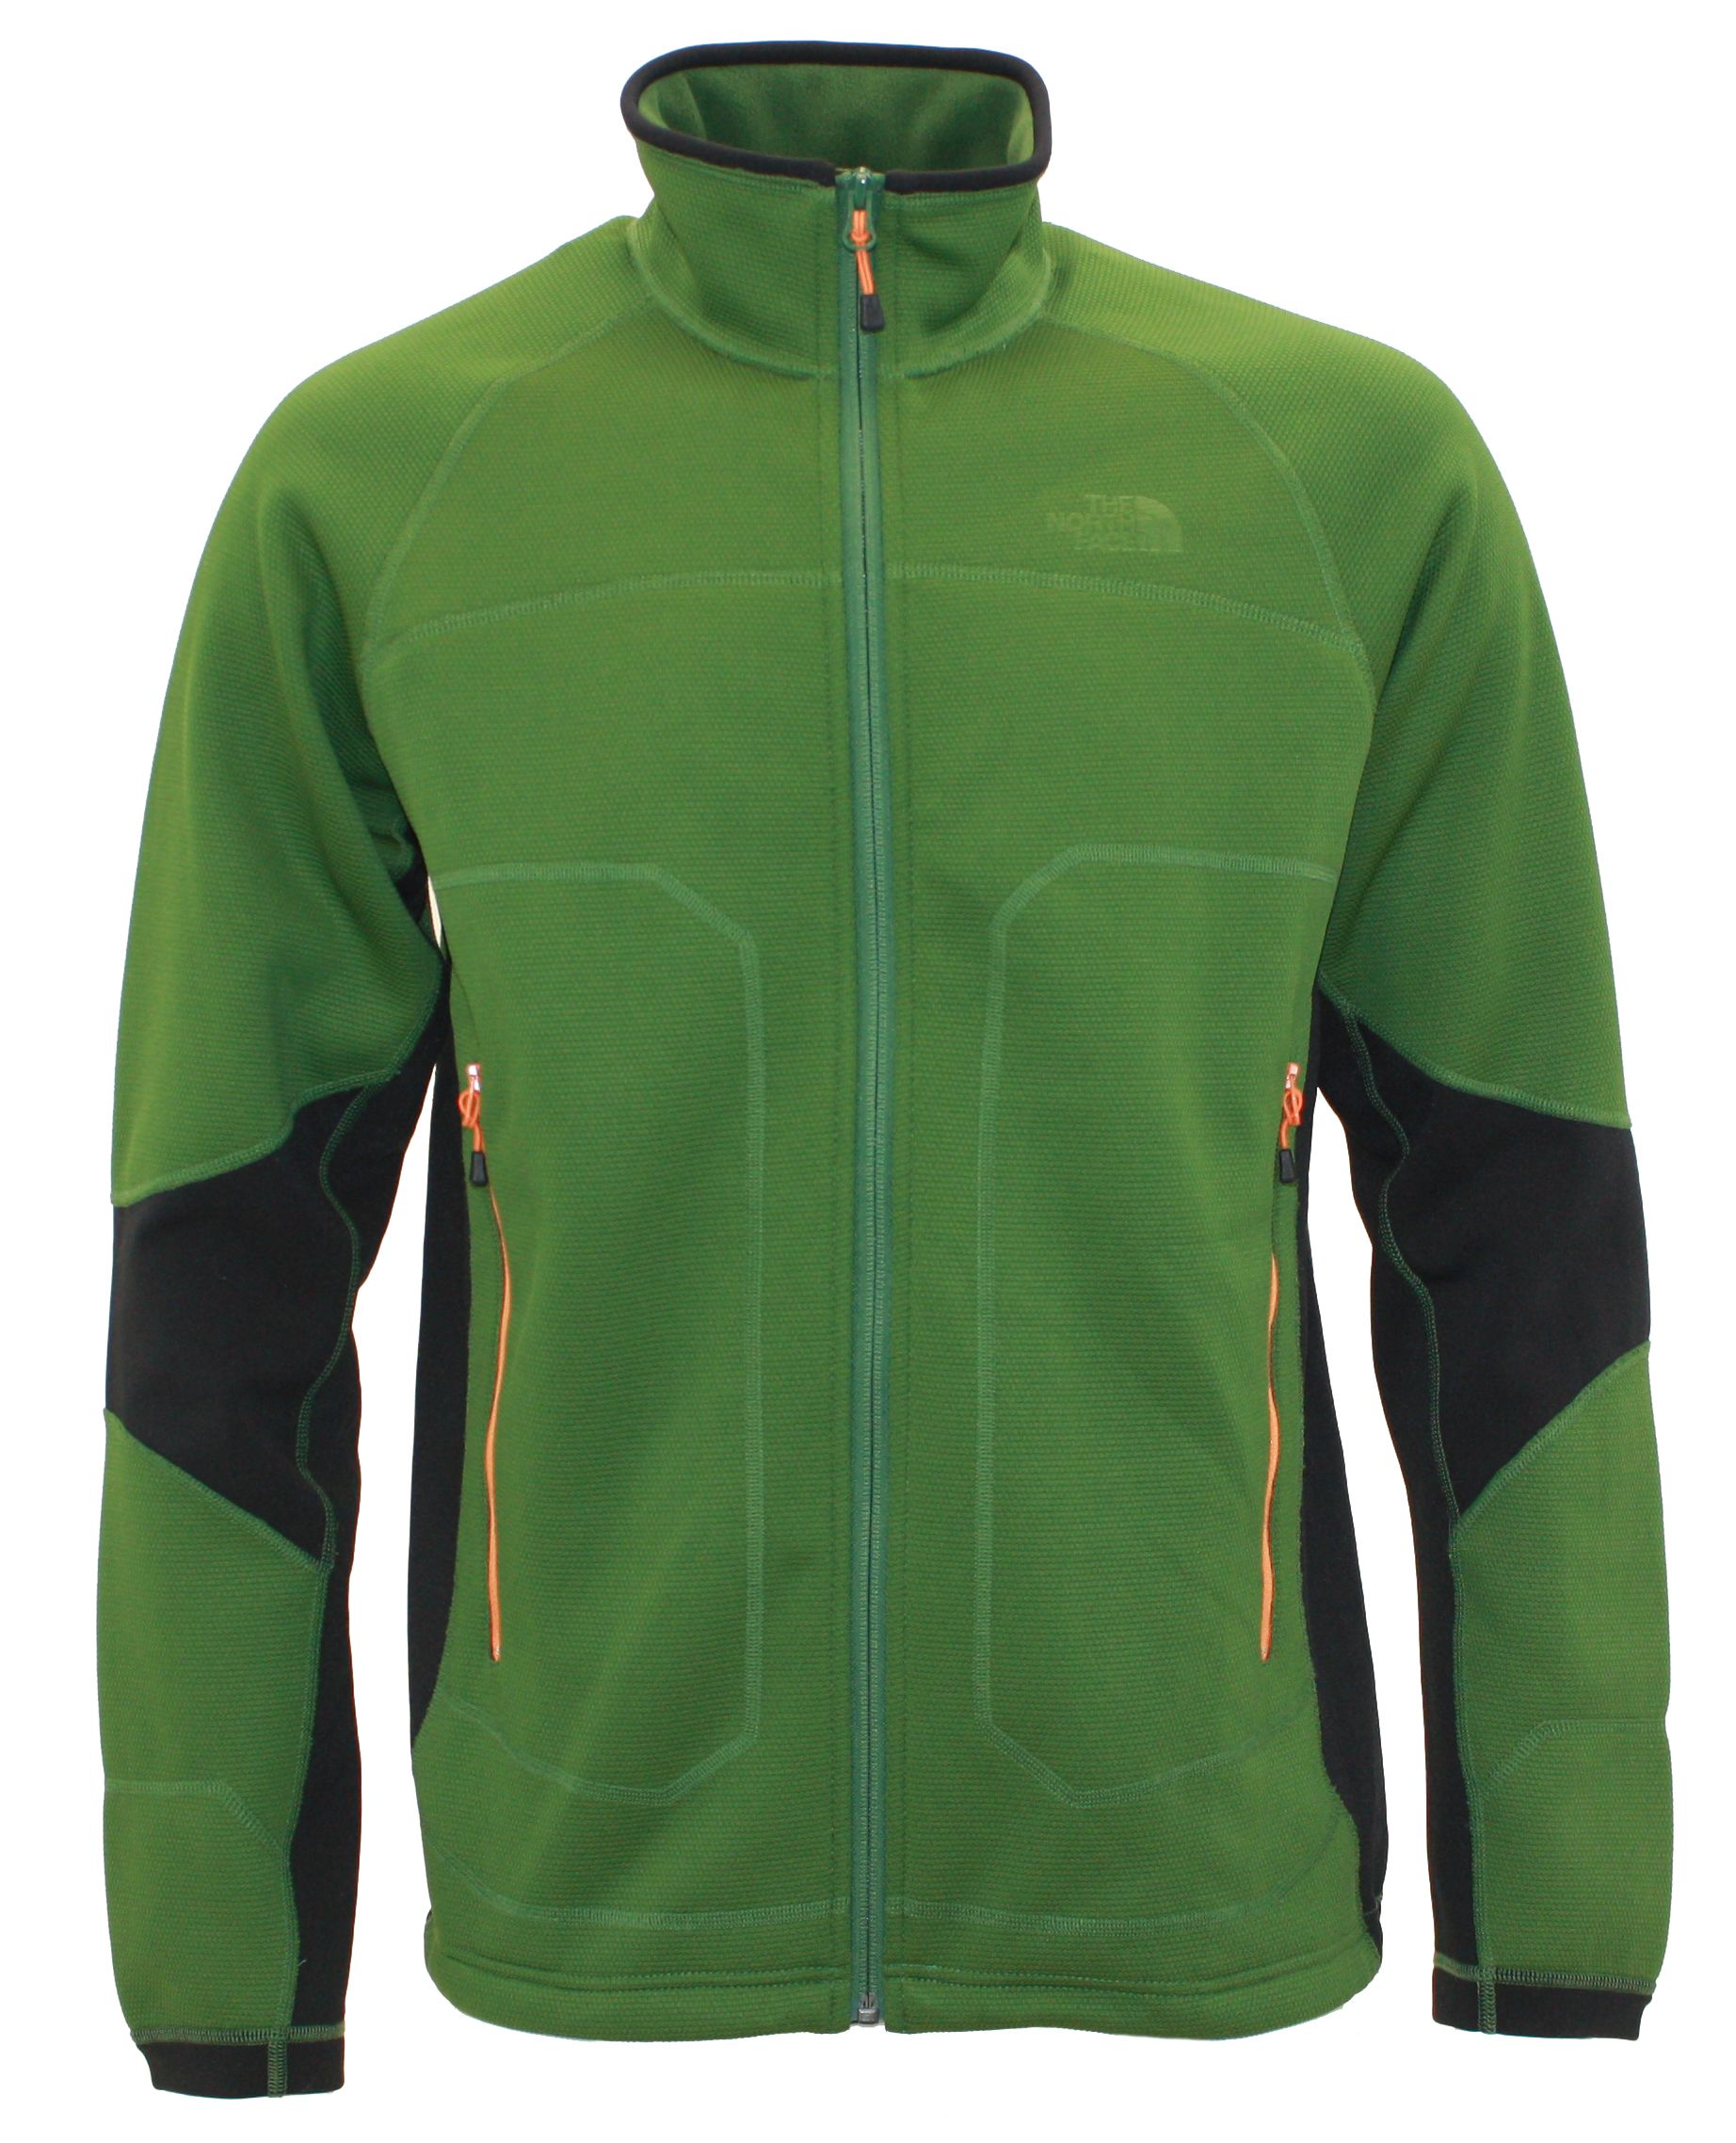 NEW The North Face Mens STEALTH BYRON FULL ZIP fleece jacket GREEN nwt 